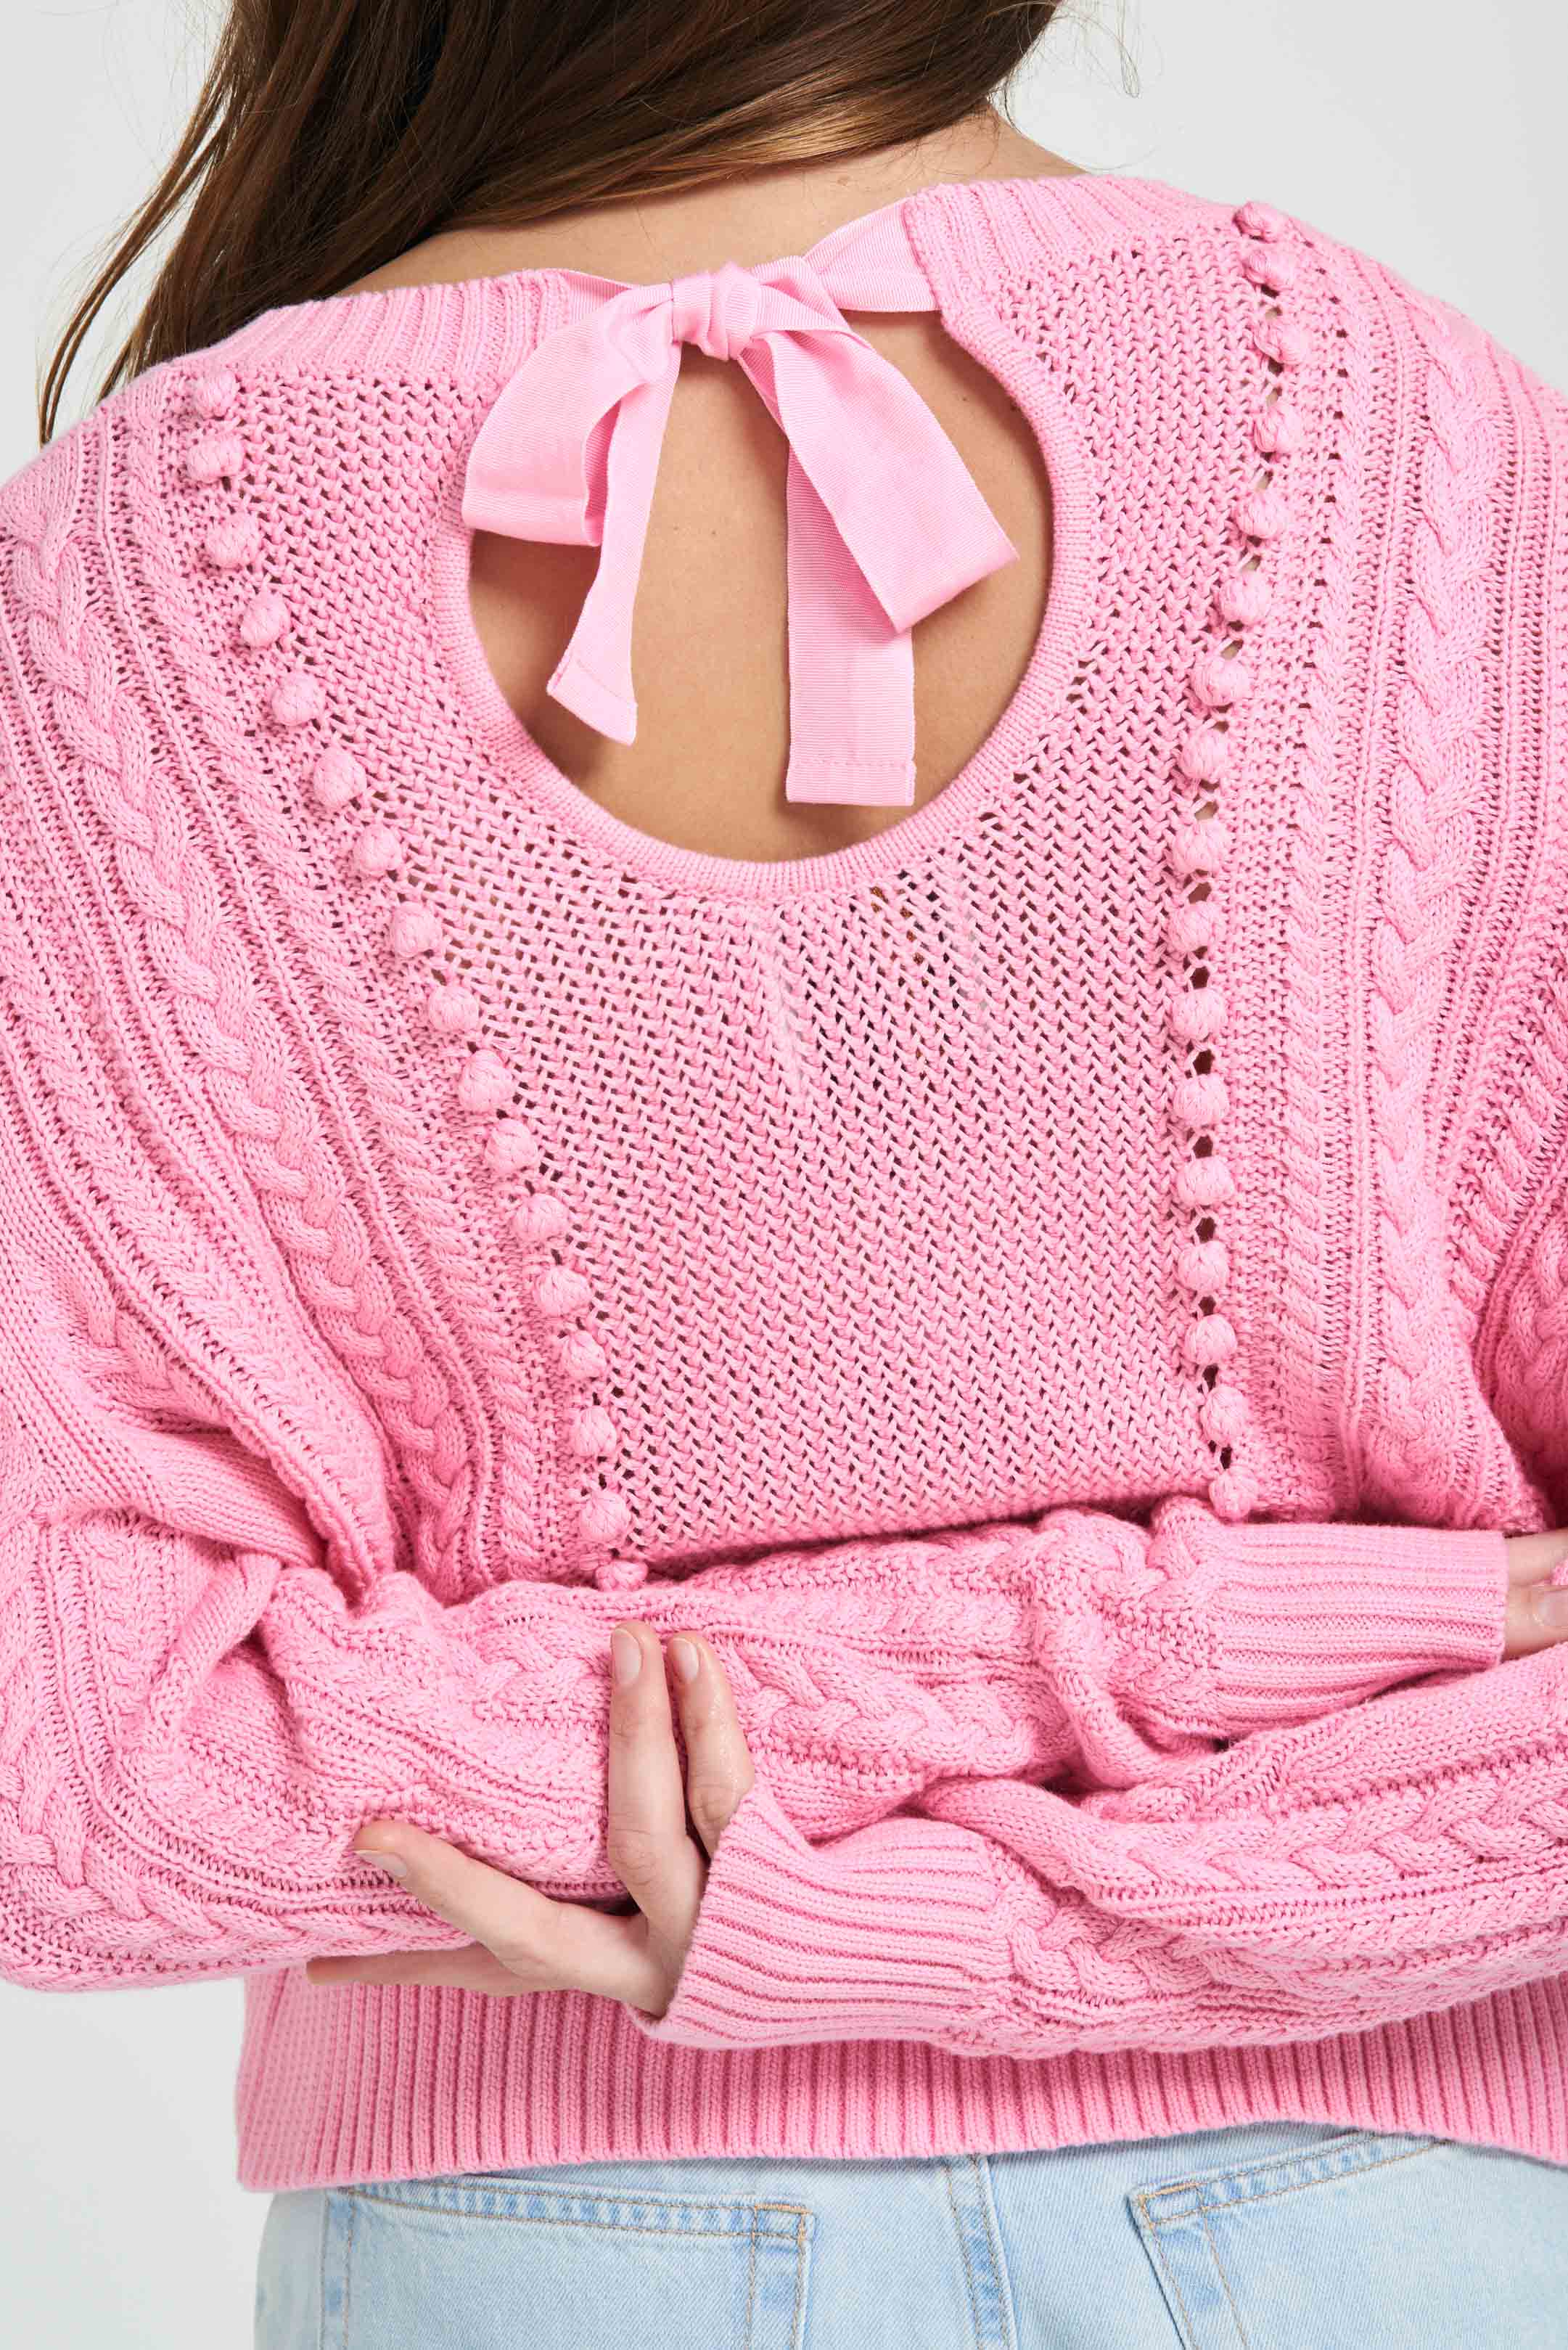 Brown haired female model wearing Jumper1234 Pink cotton aran crew neck jumper with a ribbon tie back close up